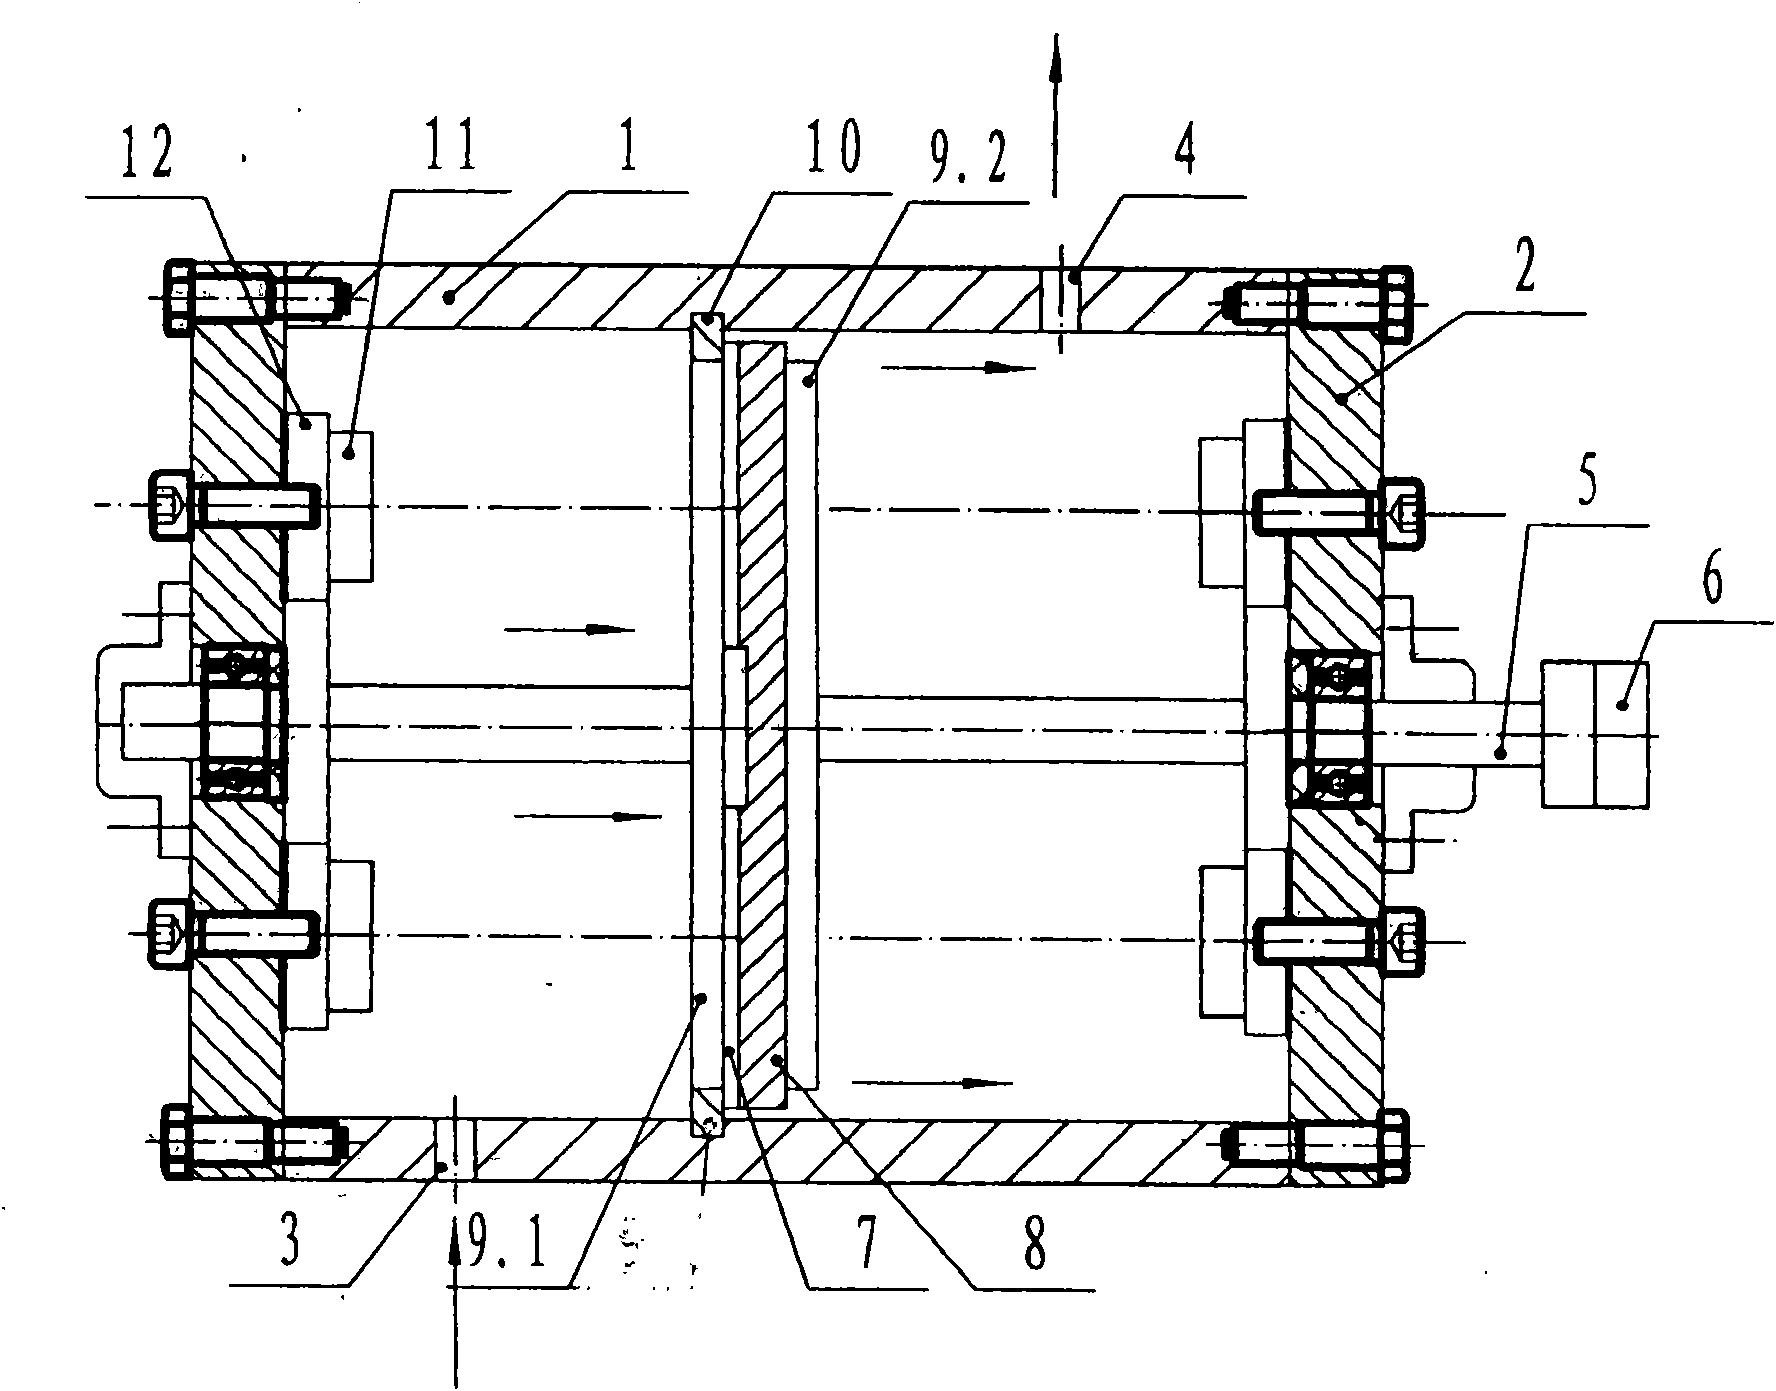 Magnetic induction heating method and special devices